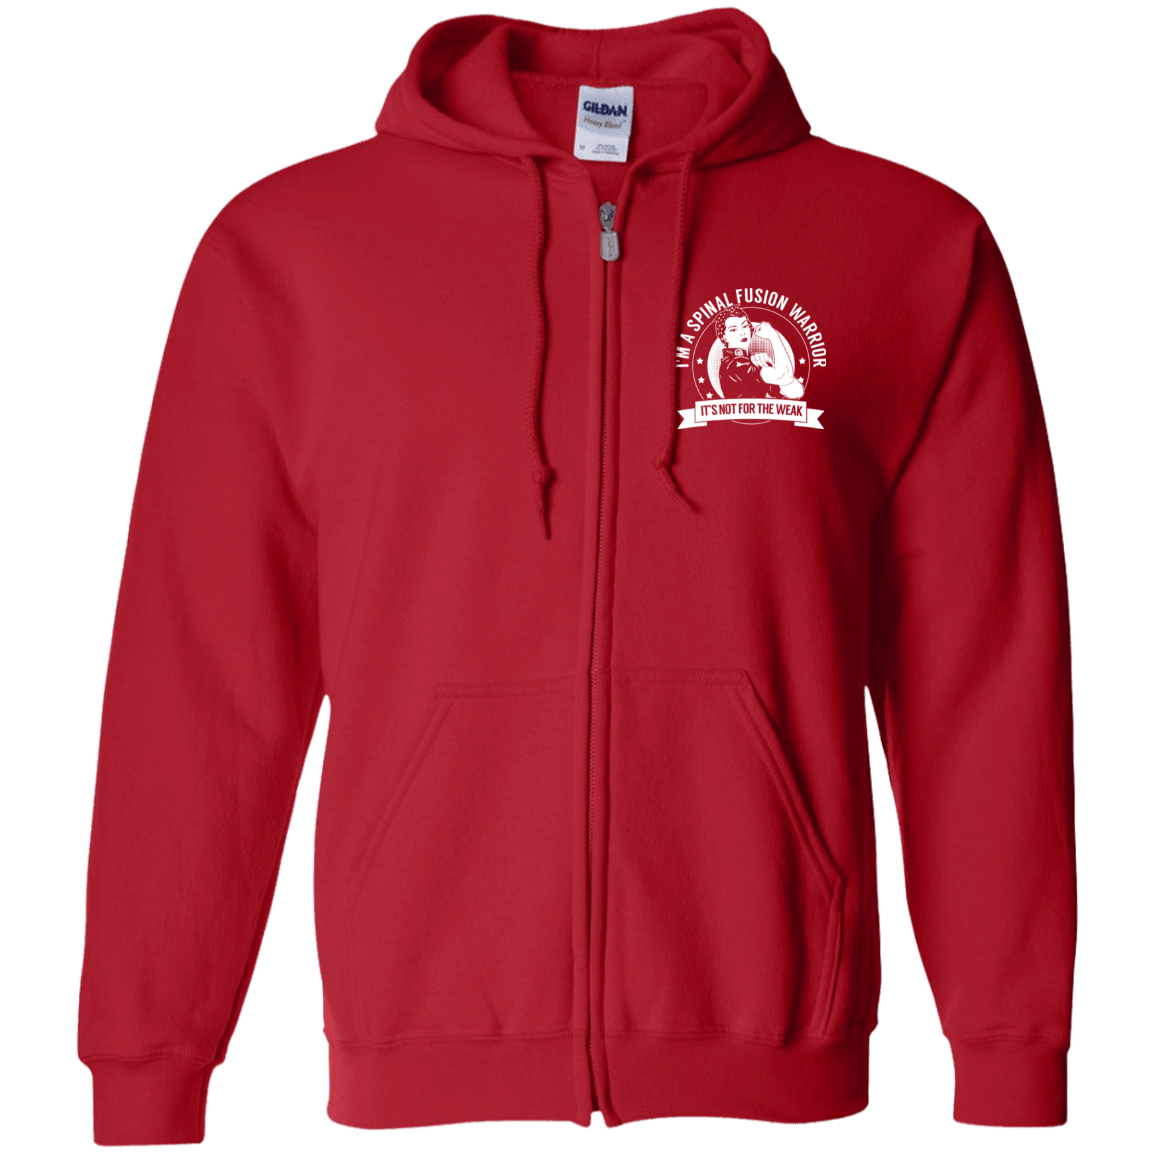 Spinal Fusion Warrior NFTW Zip Up Hooded Sweatshirt - The Unchargeables